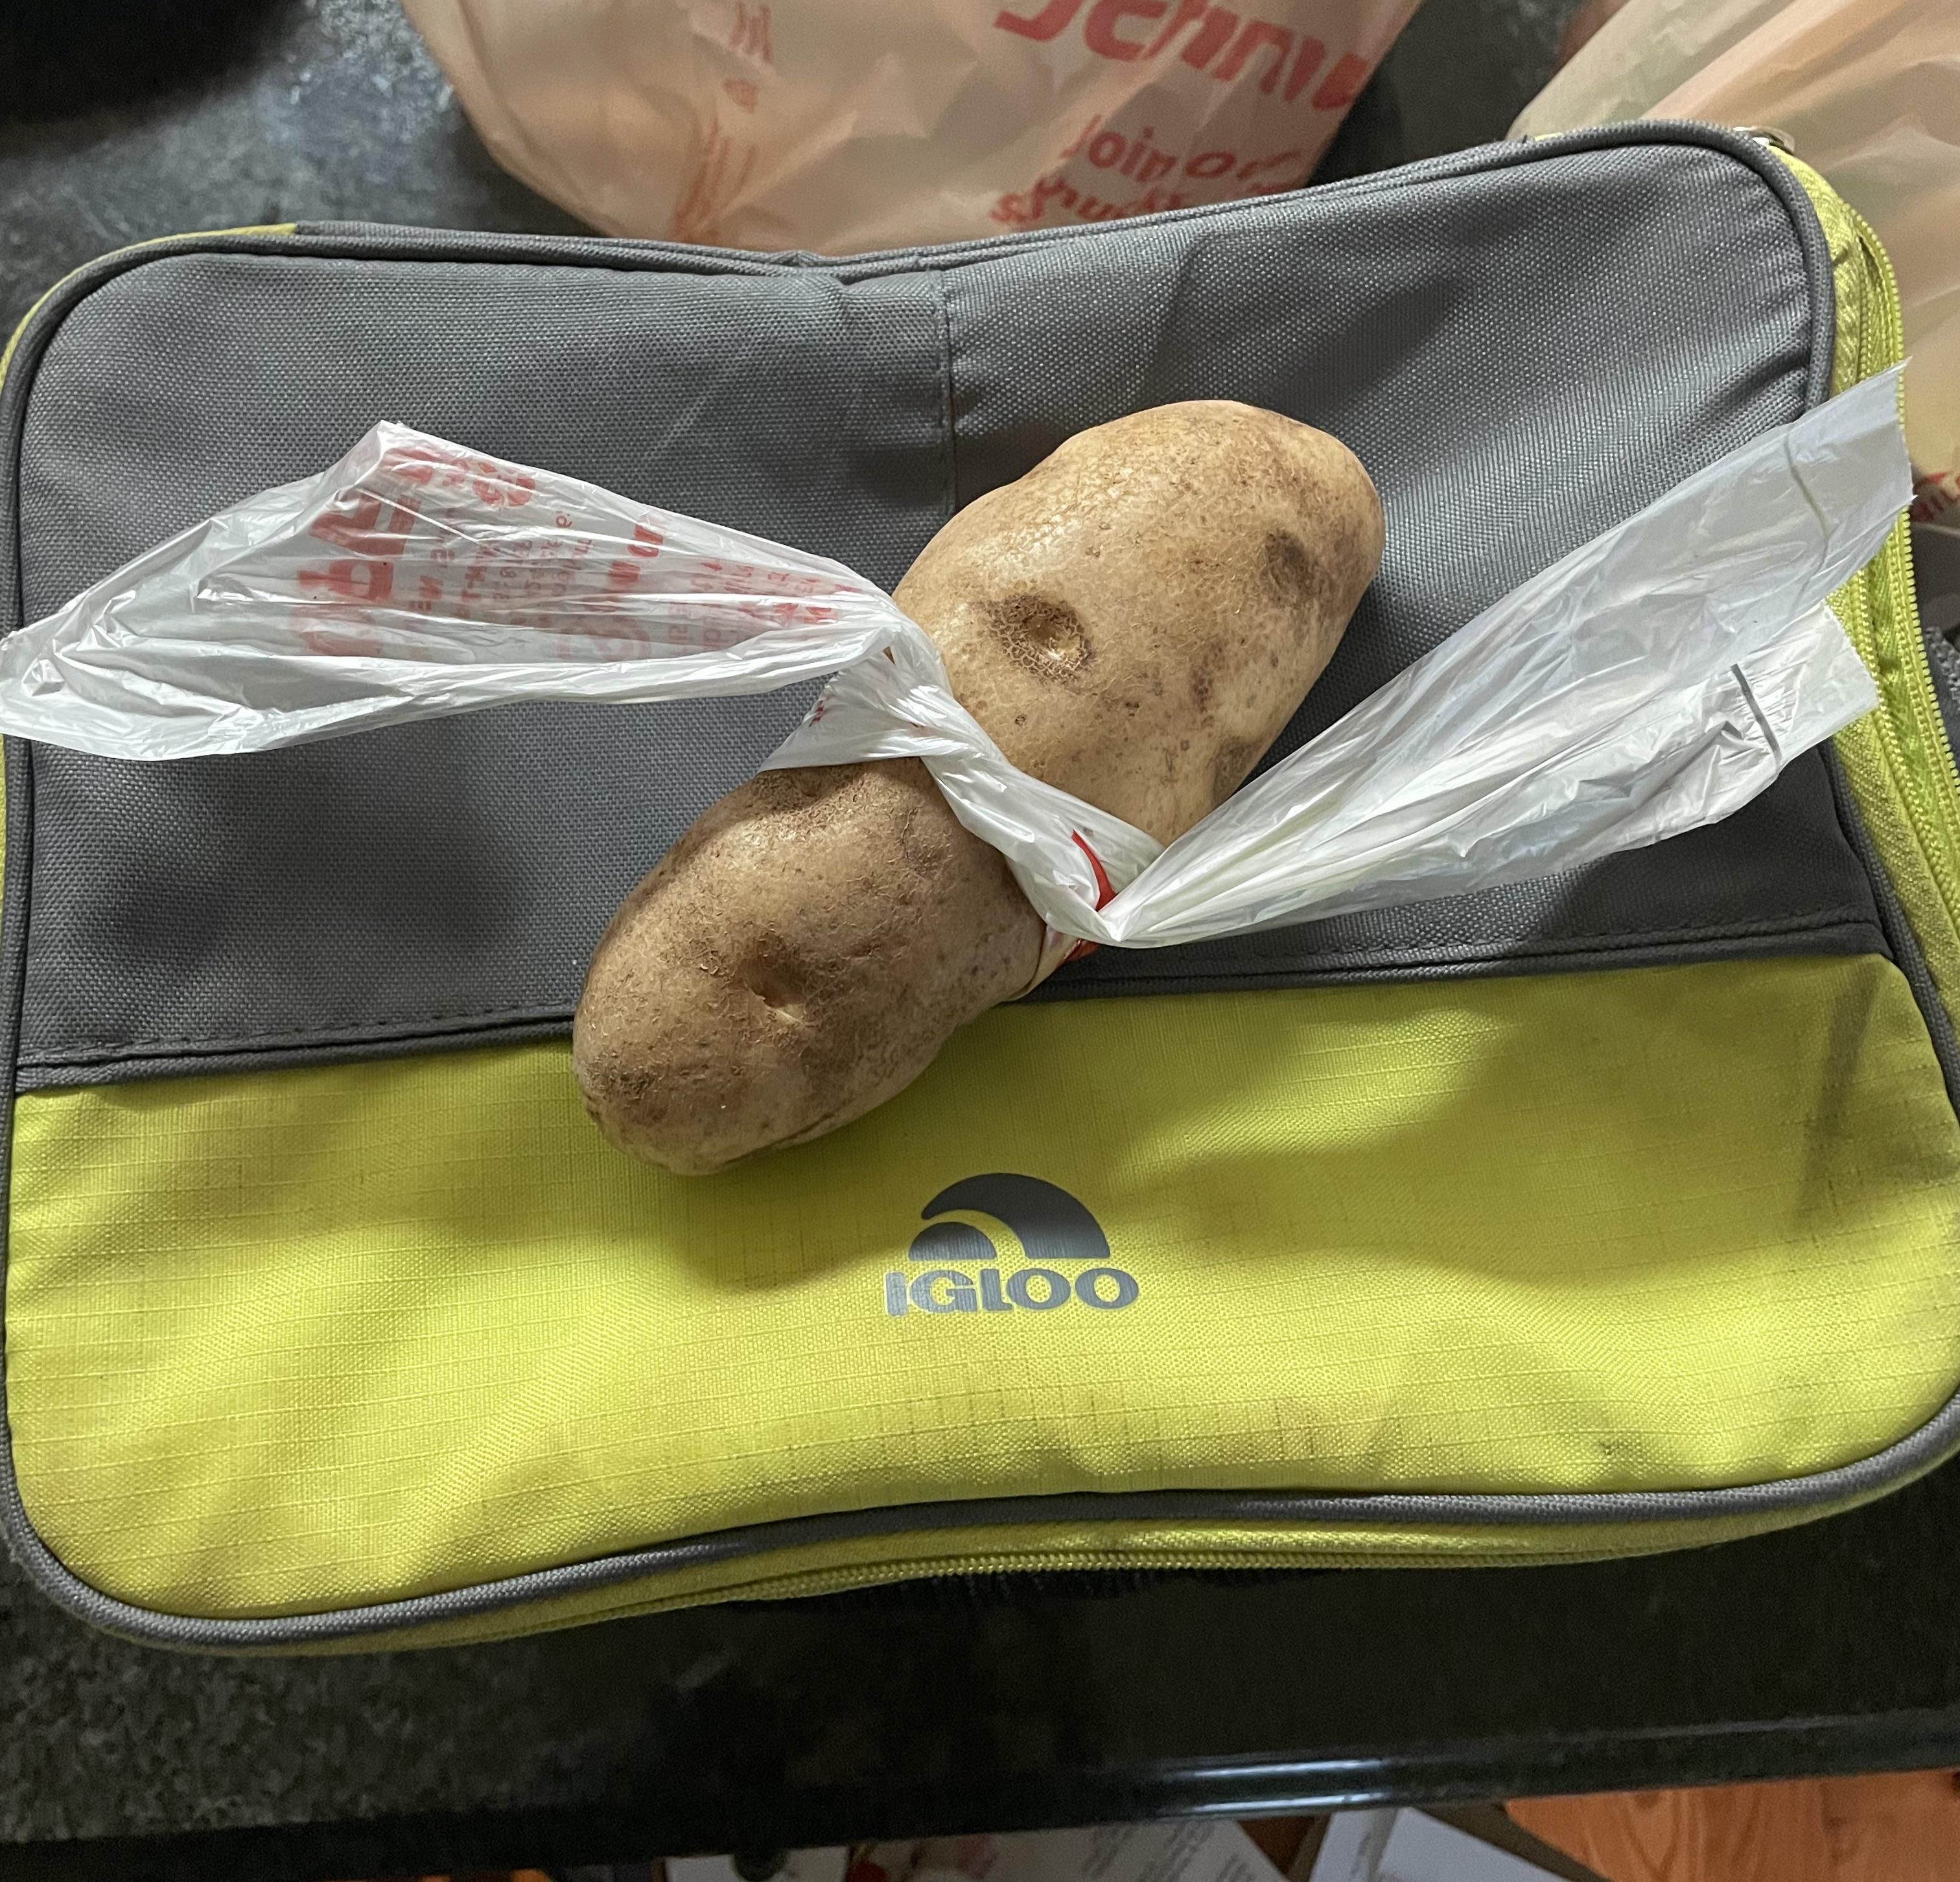 My wife couldn’t open the bag, so this was her solution when she bought the potato.